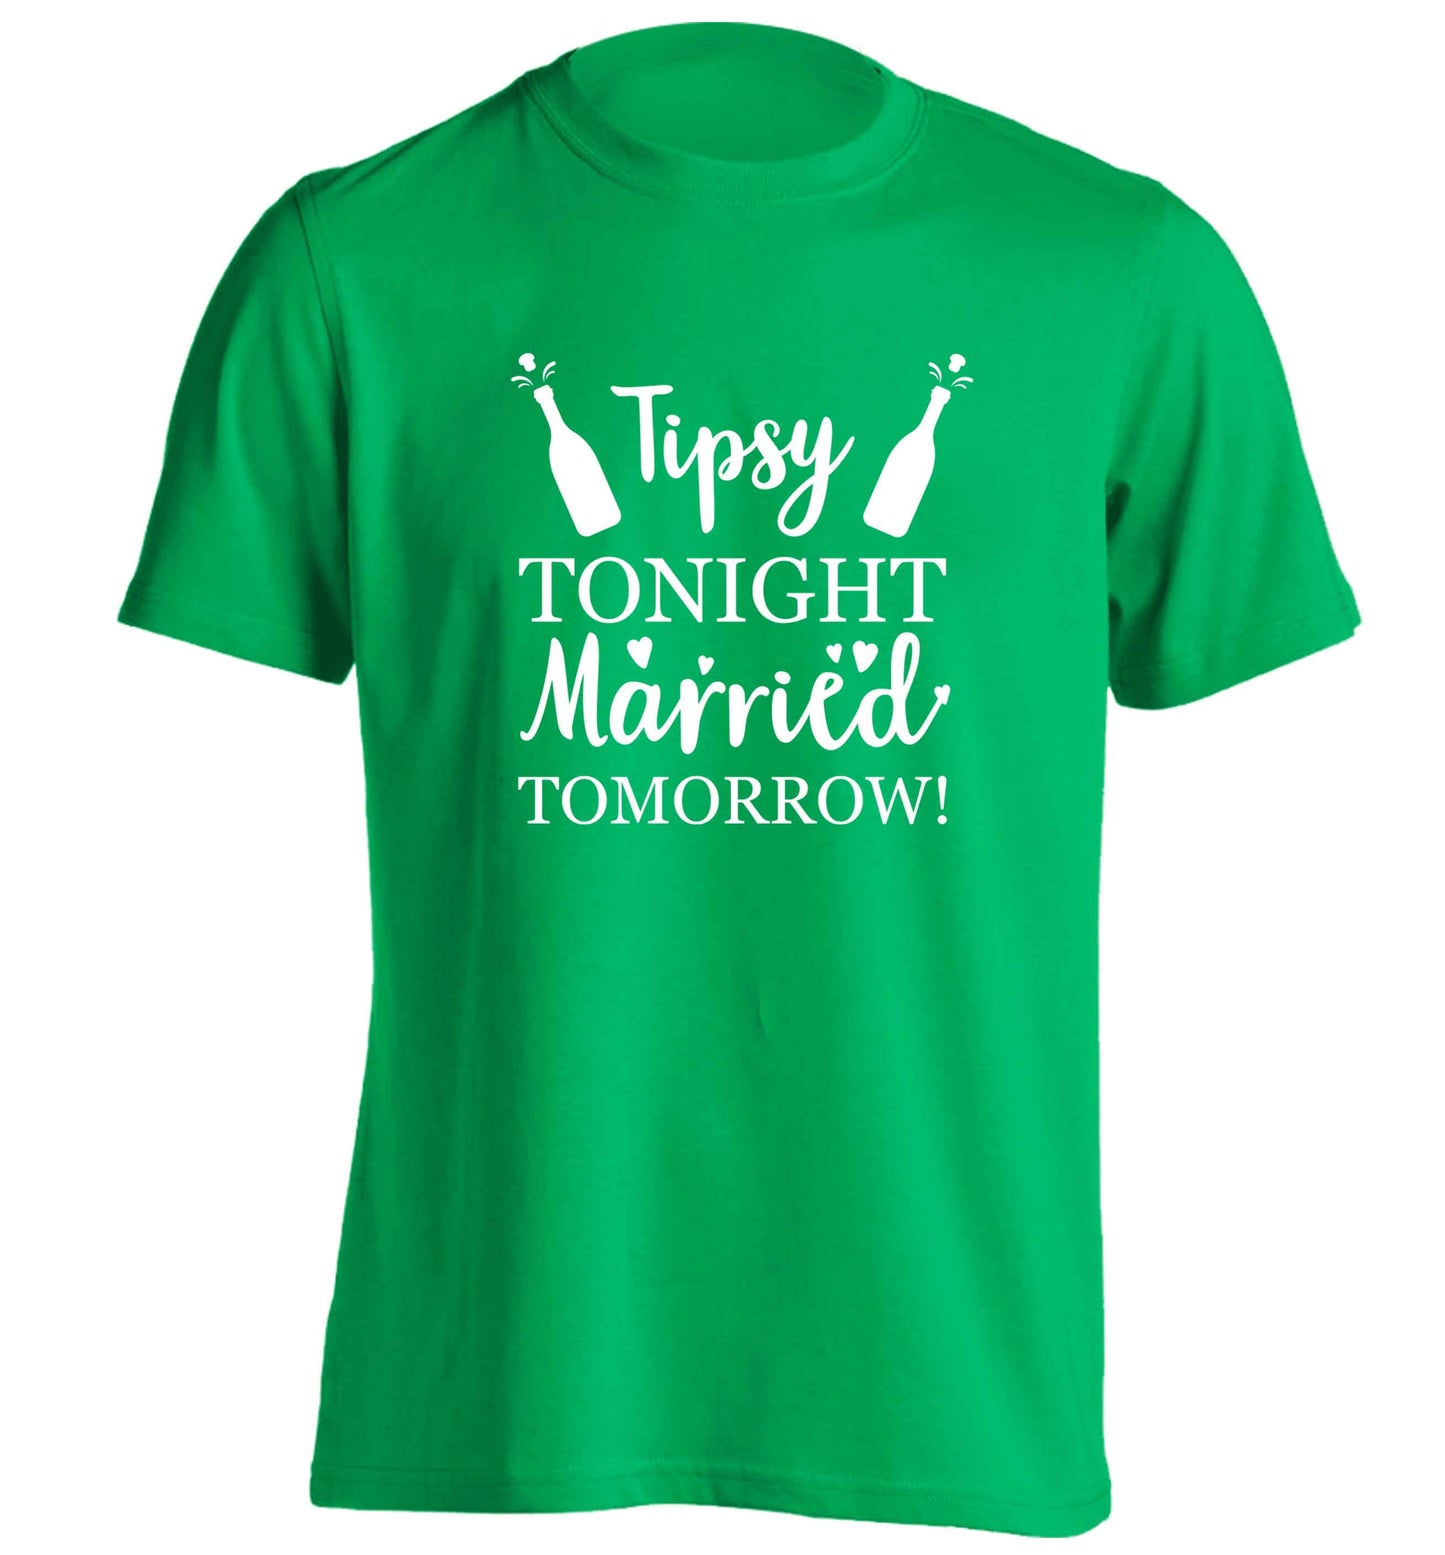 Personalised wedding thank you's Mr and Mrs wedding and date! Ideal wedding favours! adults unisex green Tshirt 2XL